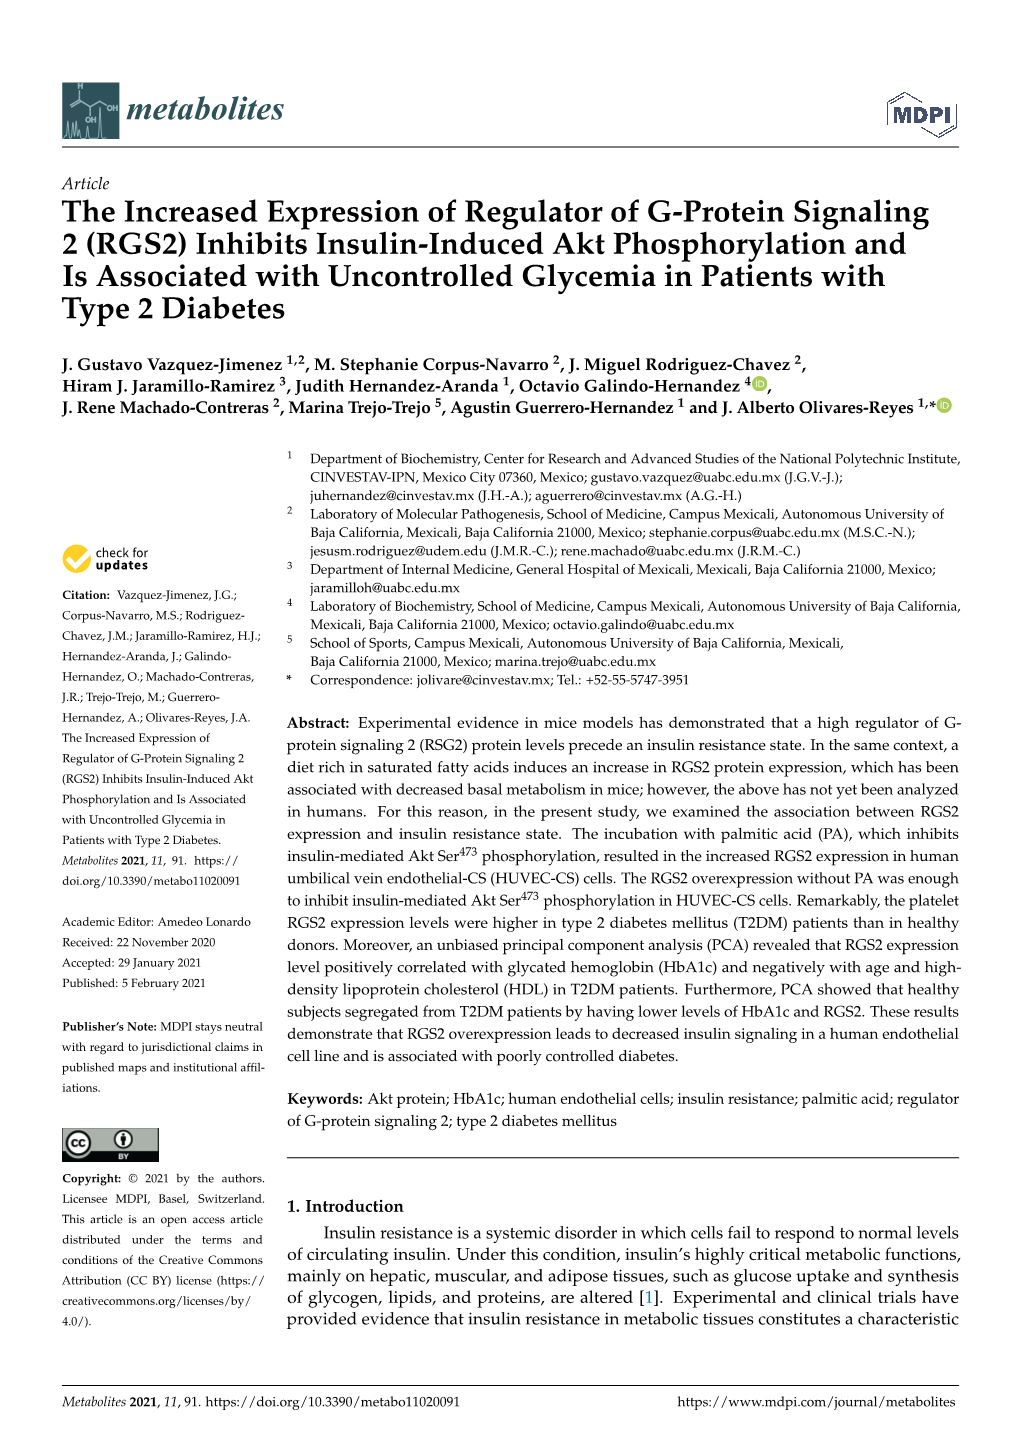 RGS2) Inhibits Insulin-Induced Akt Phosphorylation and Is Associated with Uncontrolled Glycemia in Patients with Type 2 Diabetes